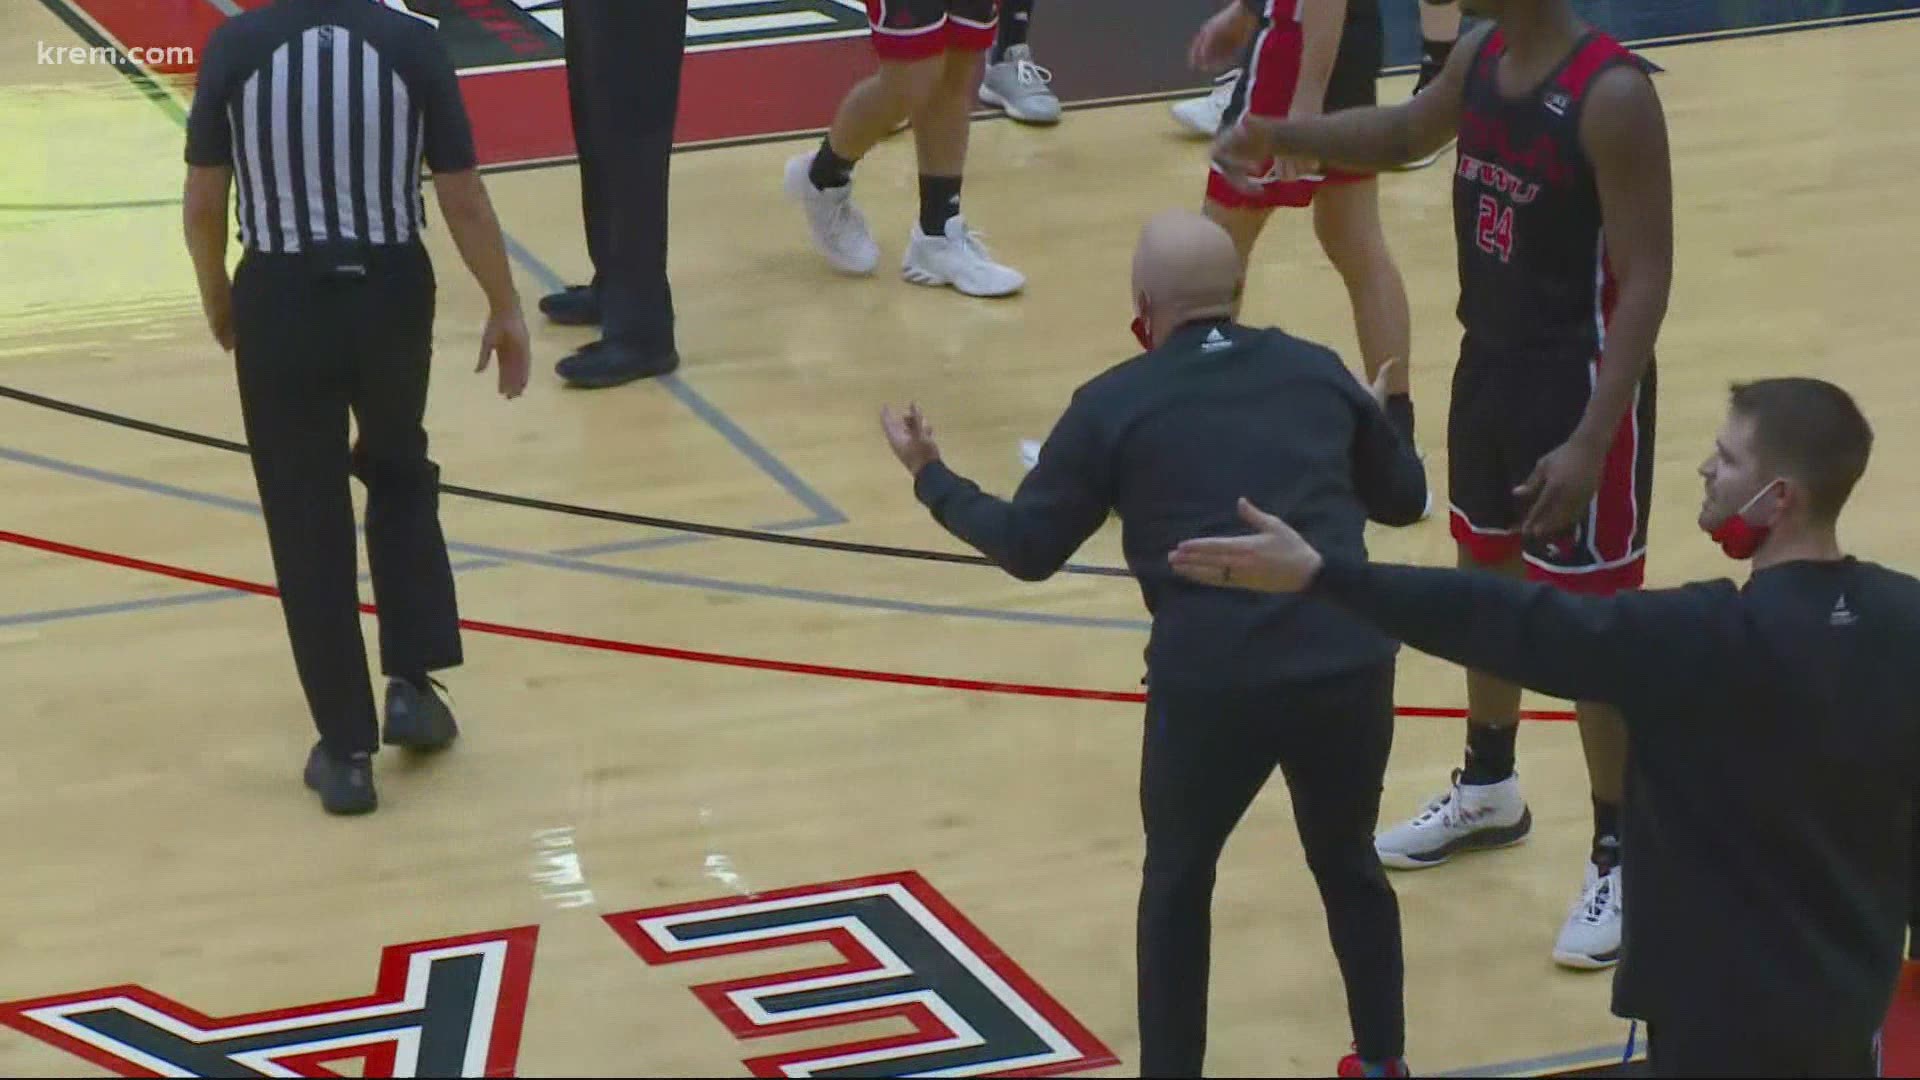 "EWU is a special place, it will always have a special place in my heart and I'm going to miss this place dearly," Legans said in a one-on-one interview with KREM.